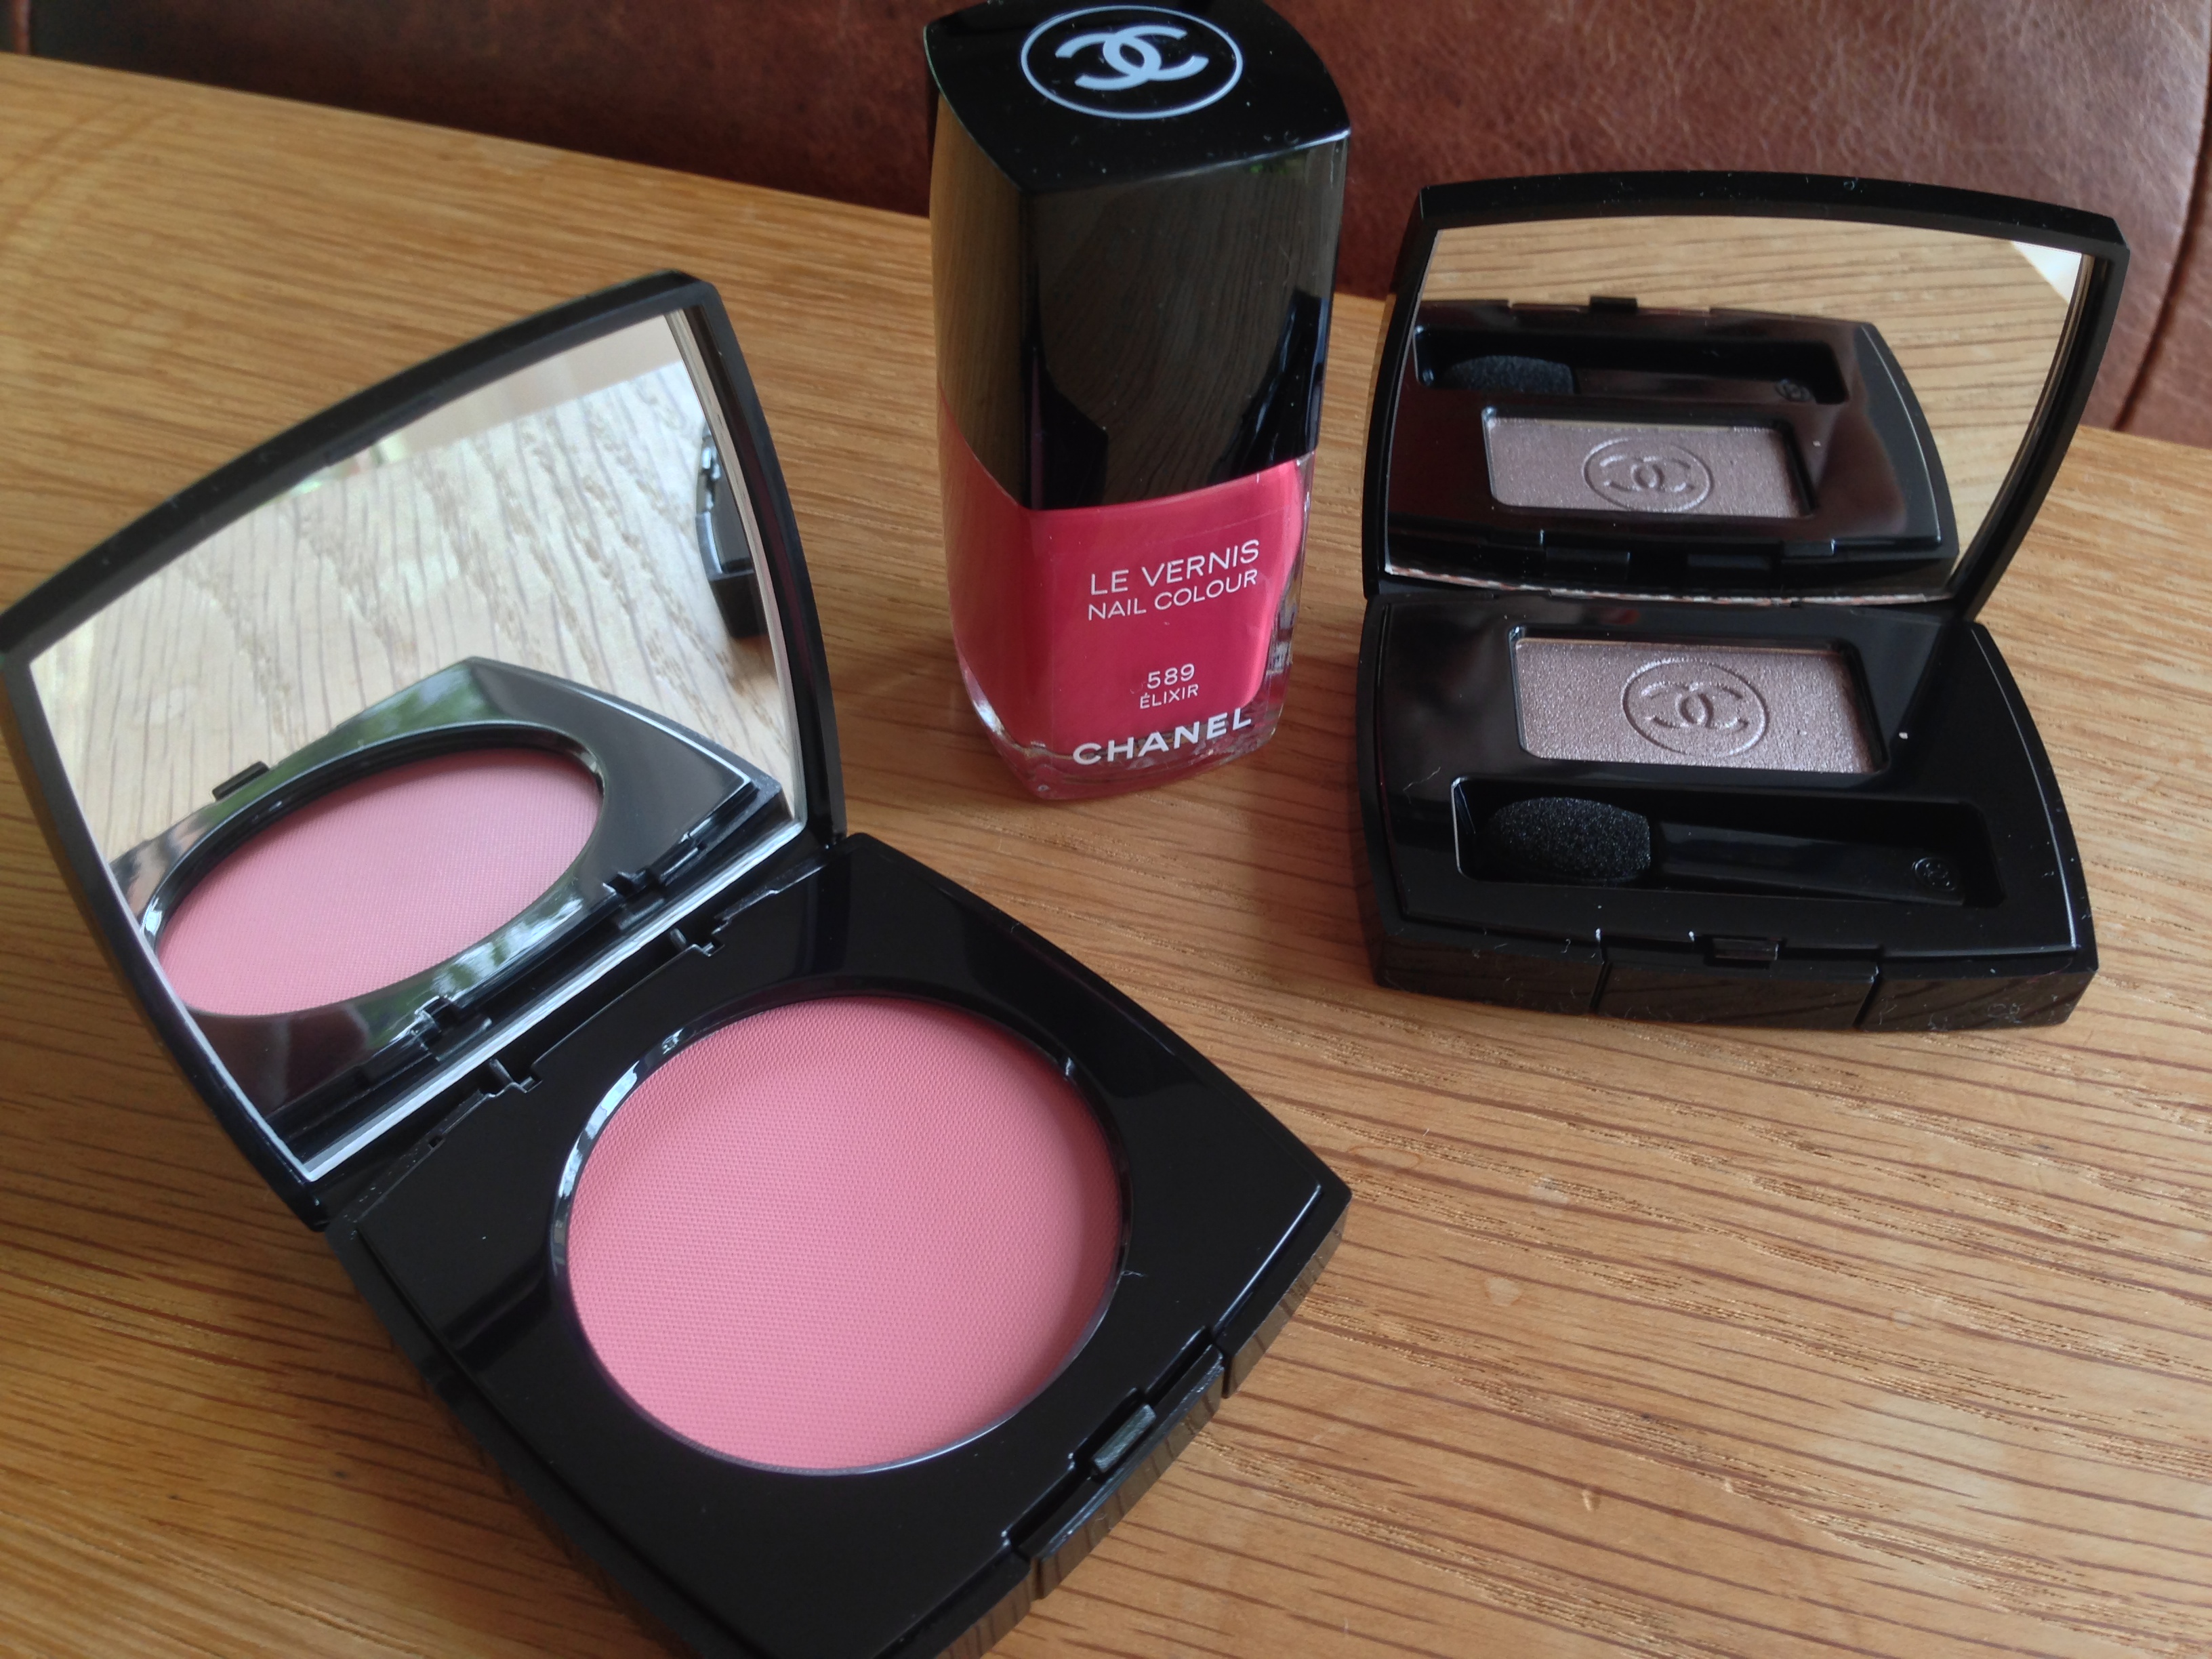 Chanel AW13: Le Blush Creme de Chanel In Inspiration, Ombre Essentielle  Soft Touch Eyeshadow In Gri-Gri, Le Vernis Nail Colour In Elixer: Review,  Swatches 